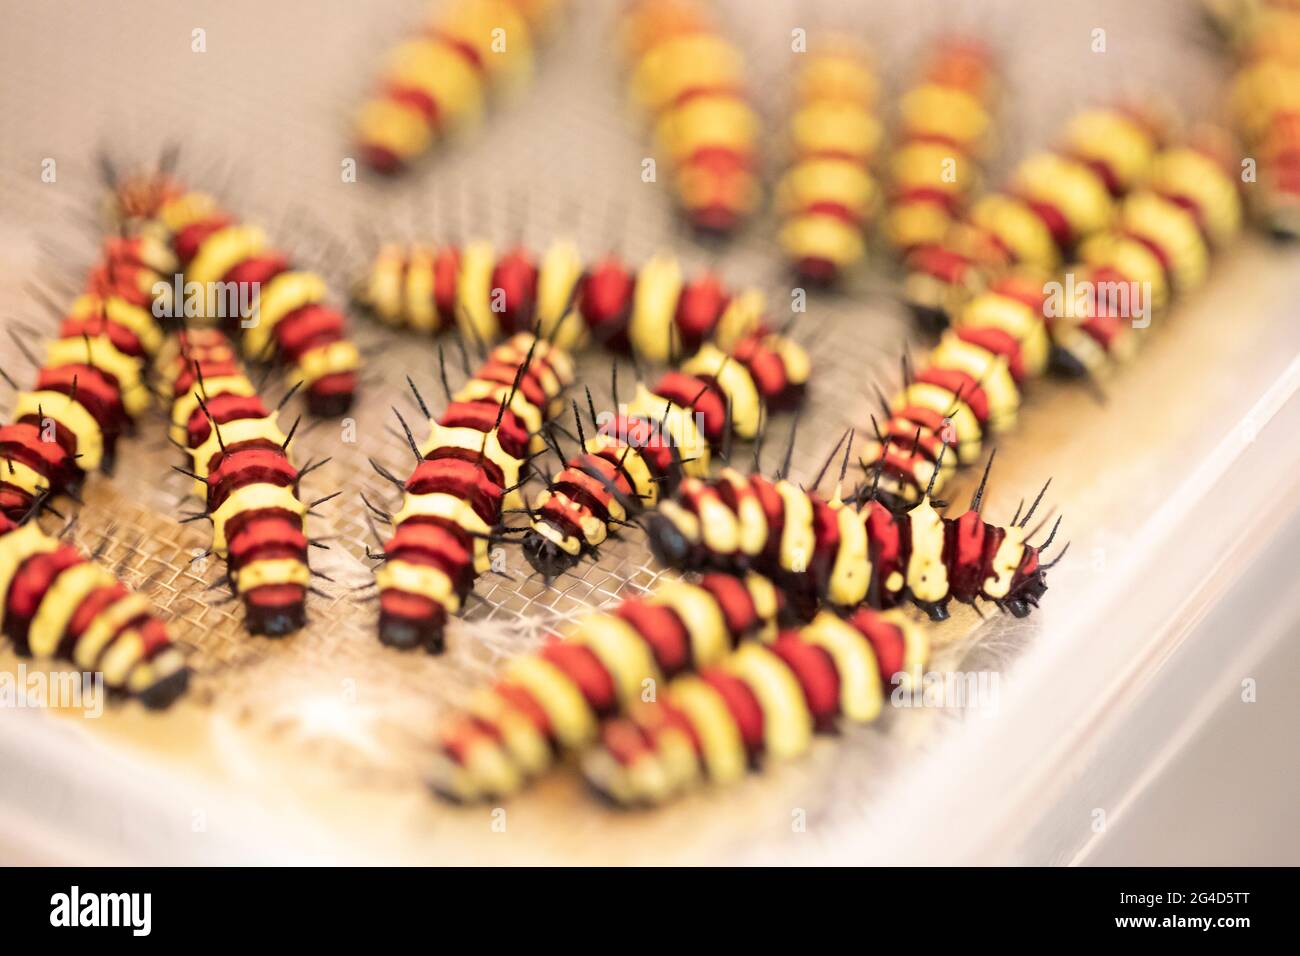 Leopard Lacewing butterfly worm many on care box Stock Photo